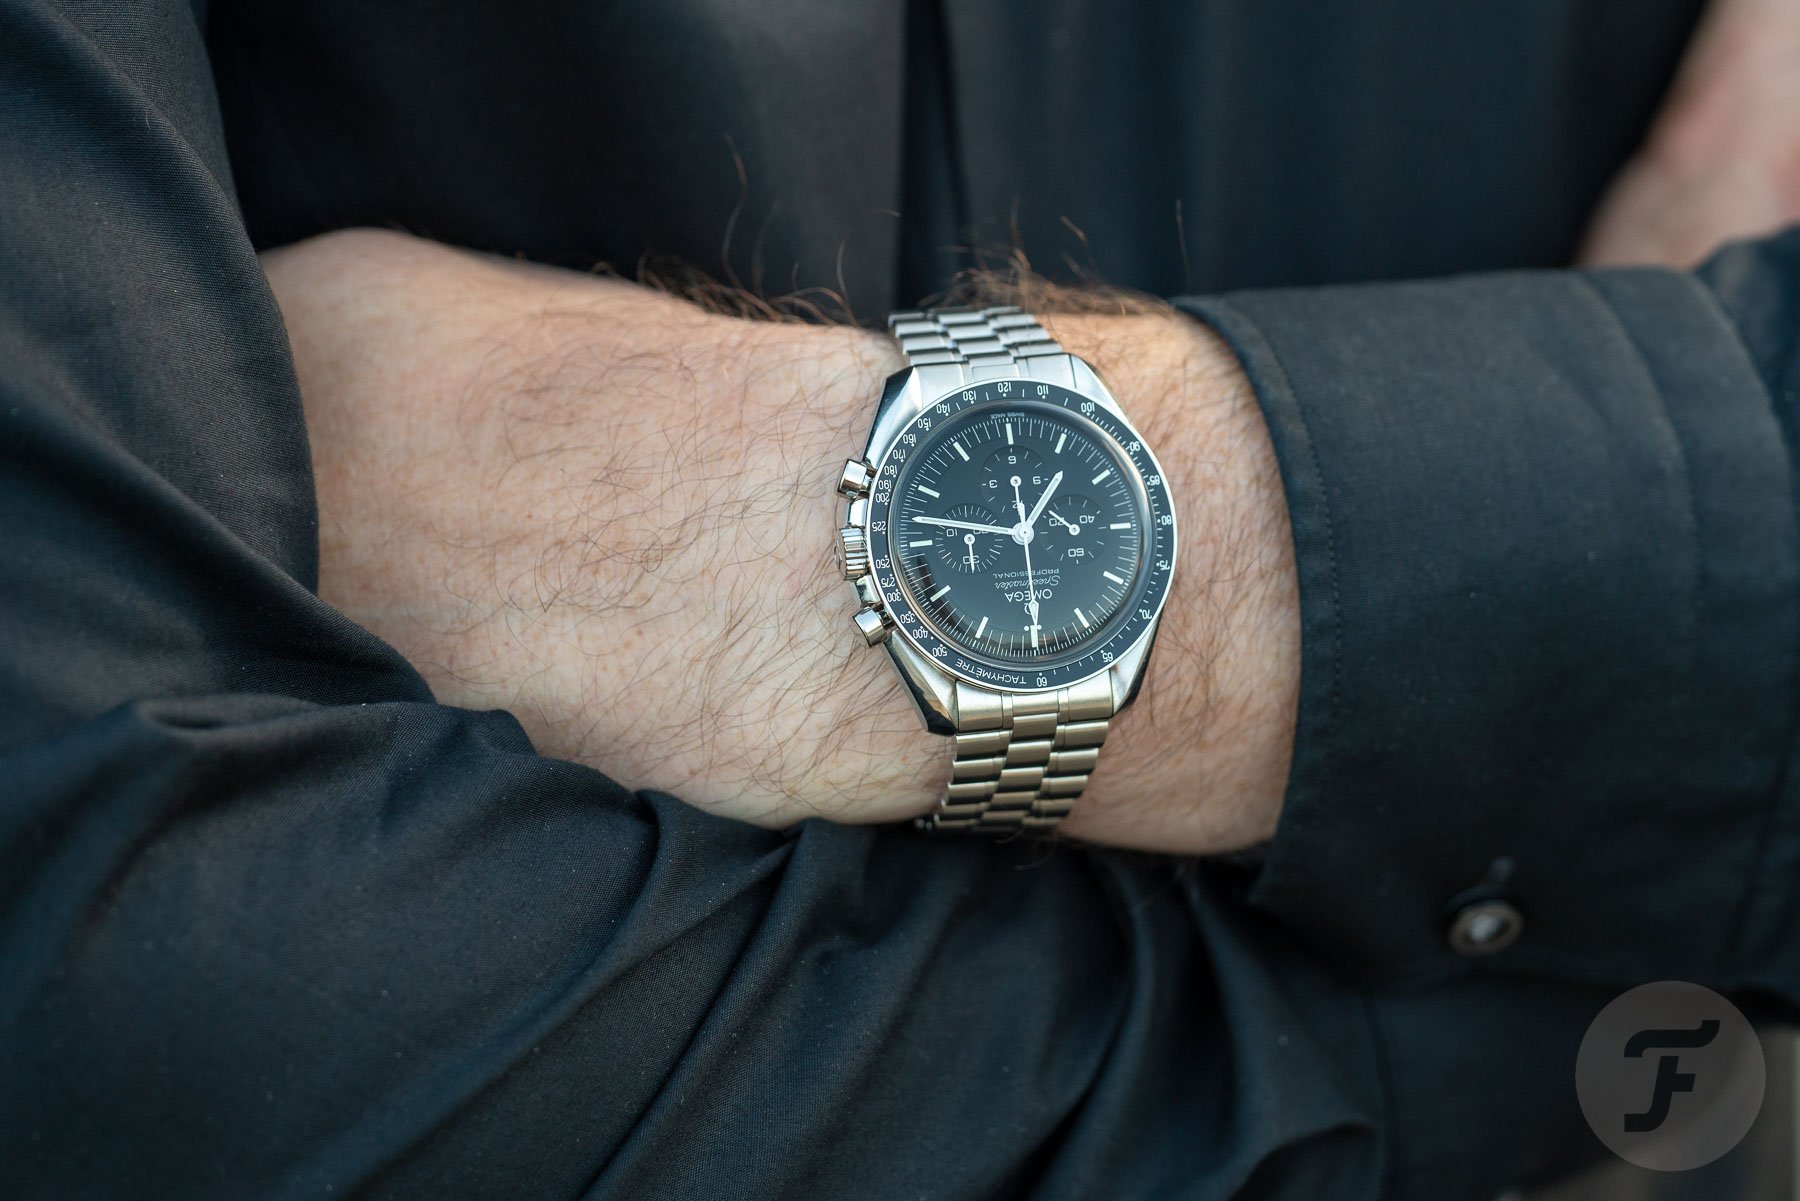 Details: The 2021 Omega Speedmaster Professional ref. 310.30.42.50.01.001 -  THE COLLECTIVE